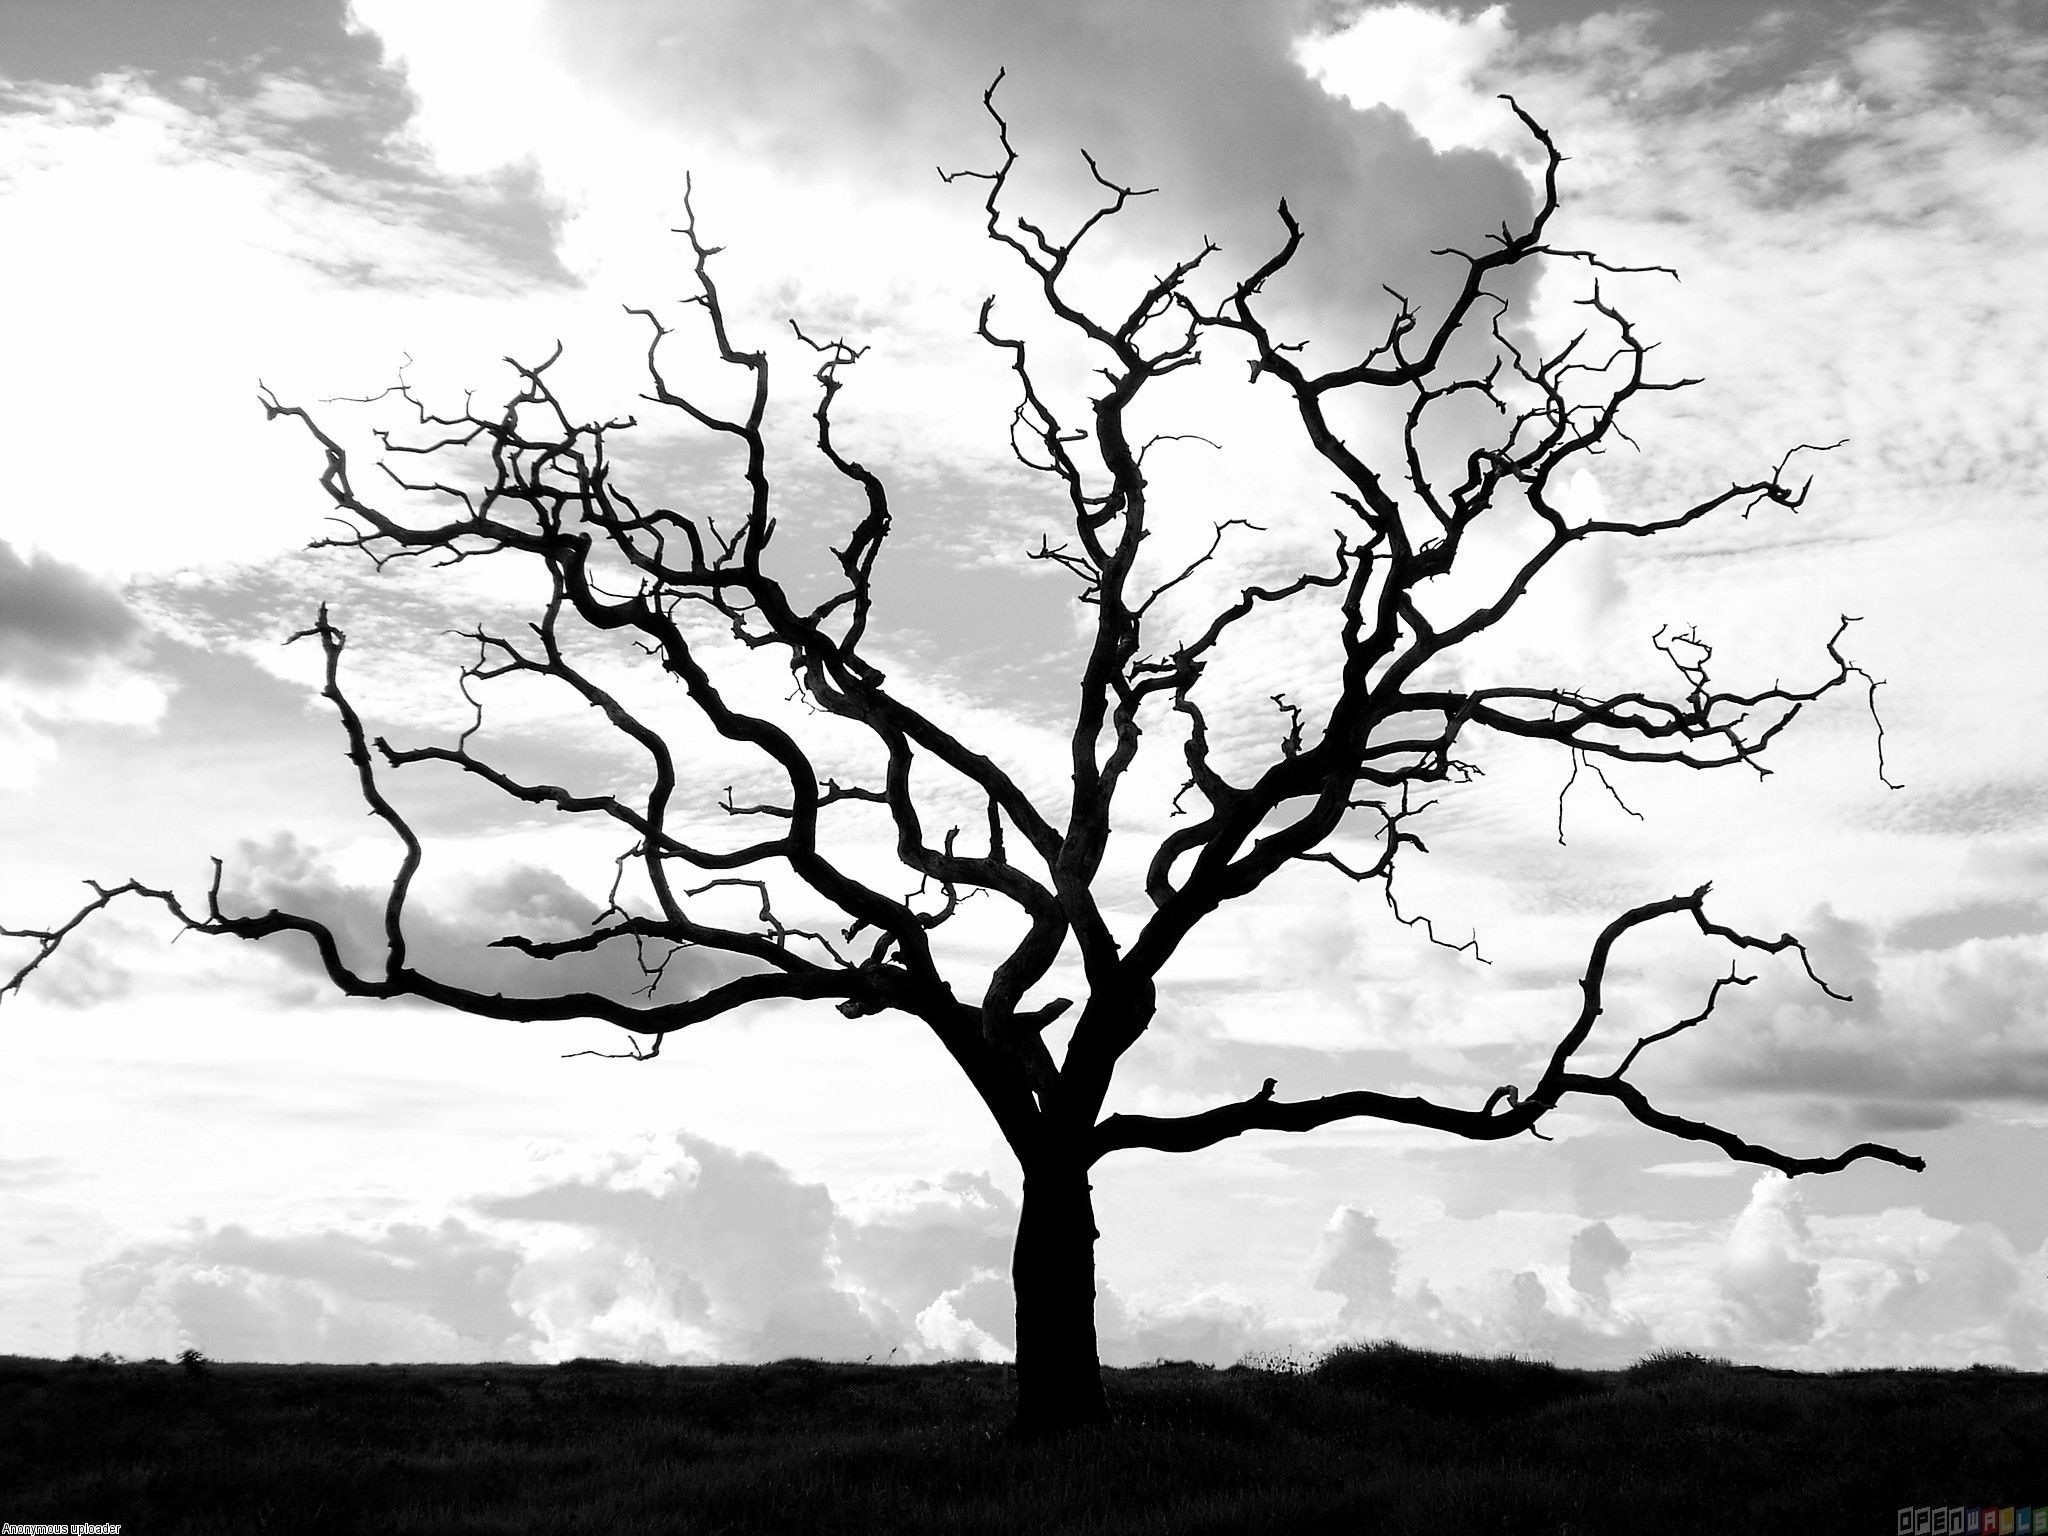 2048x1536 Tree Without Leaves Stock Photos Illustrations And Vector Art Quote